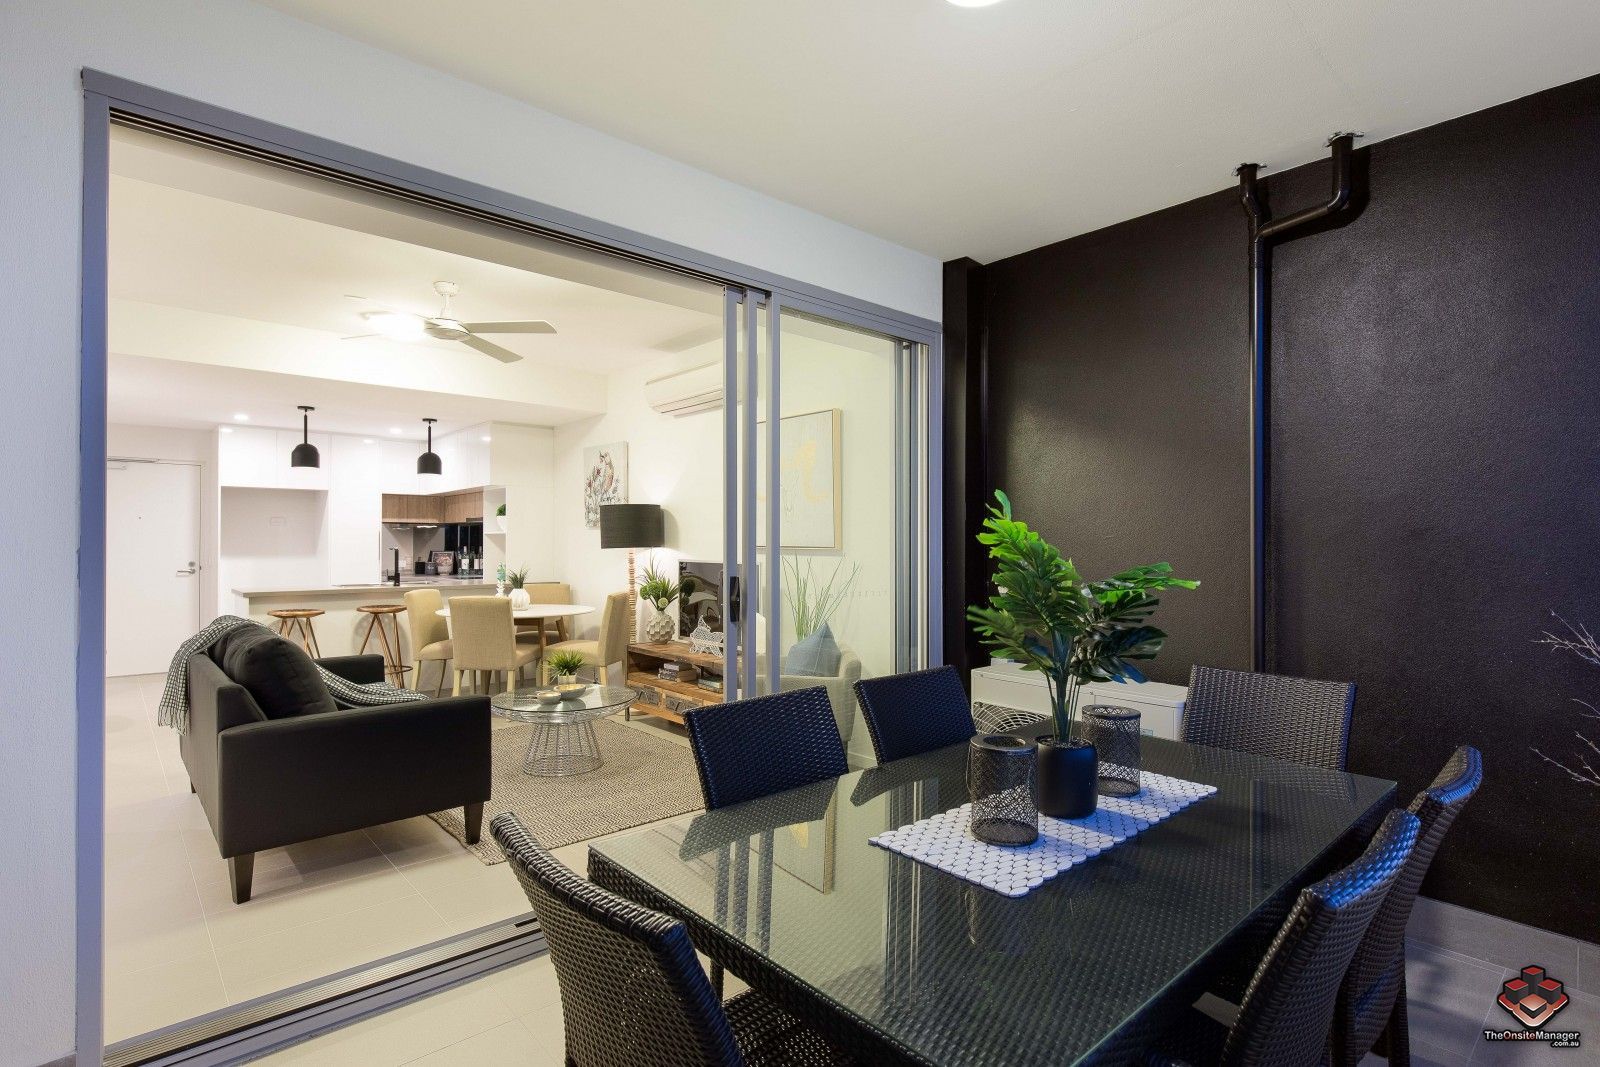 2 bedrooms Apartment / Unit / Flat in ID:21130247/38 38 Lowerson St LUTWYCHE QLD, 4030